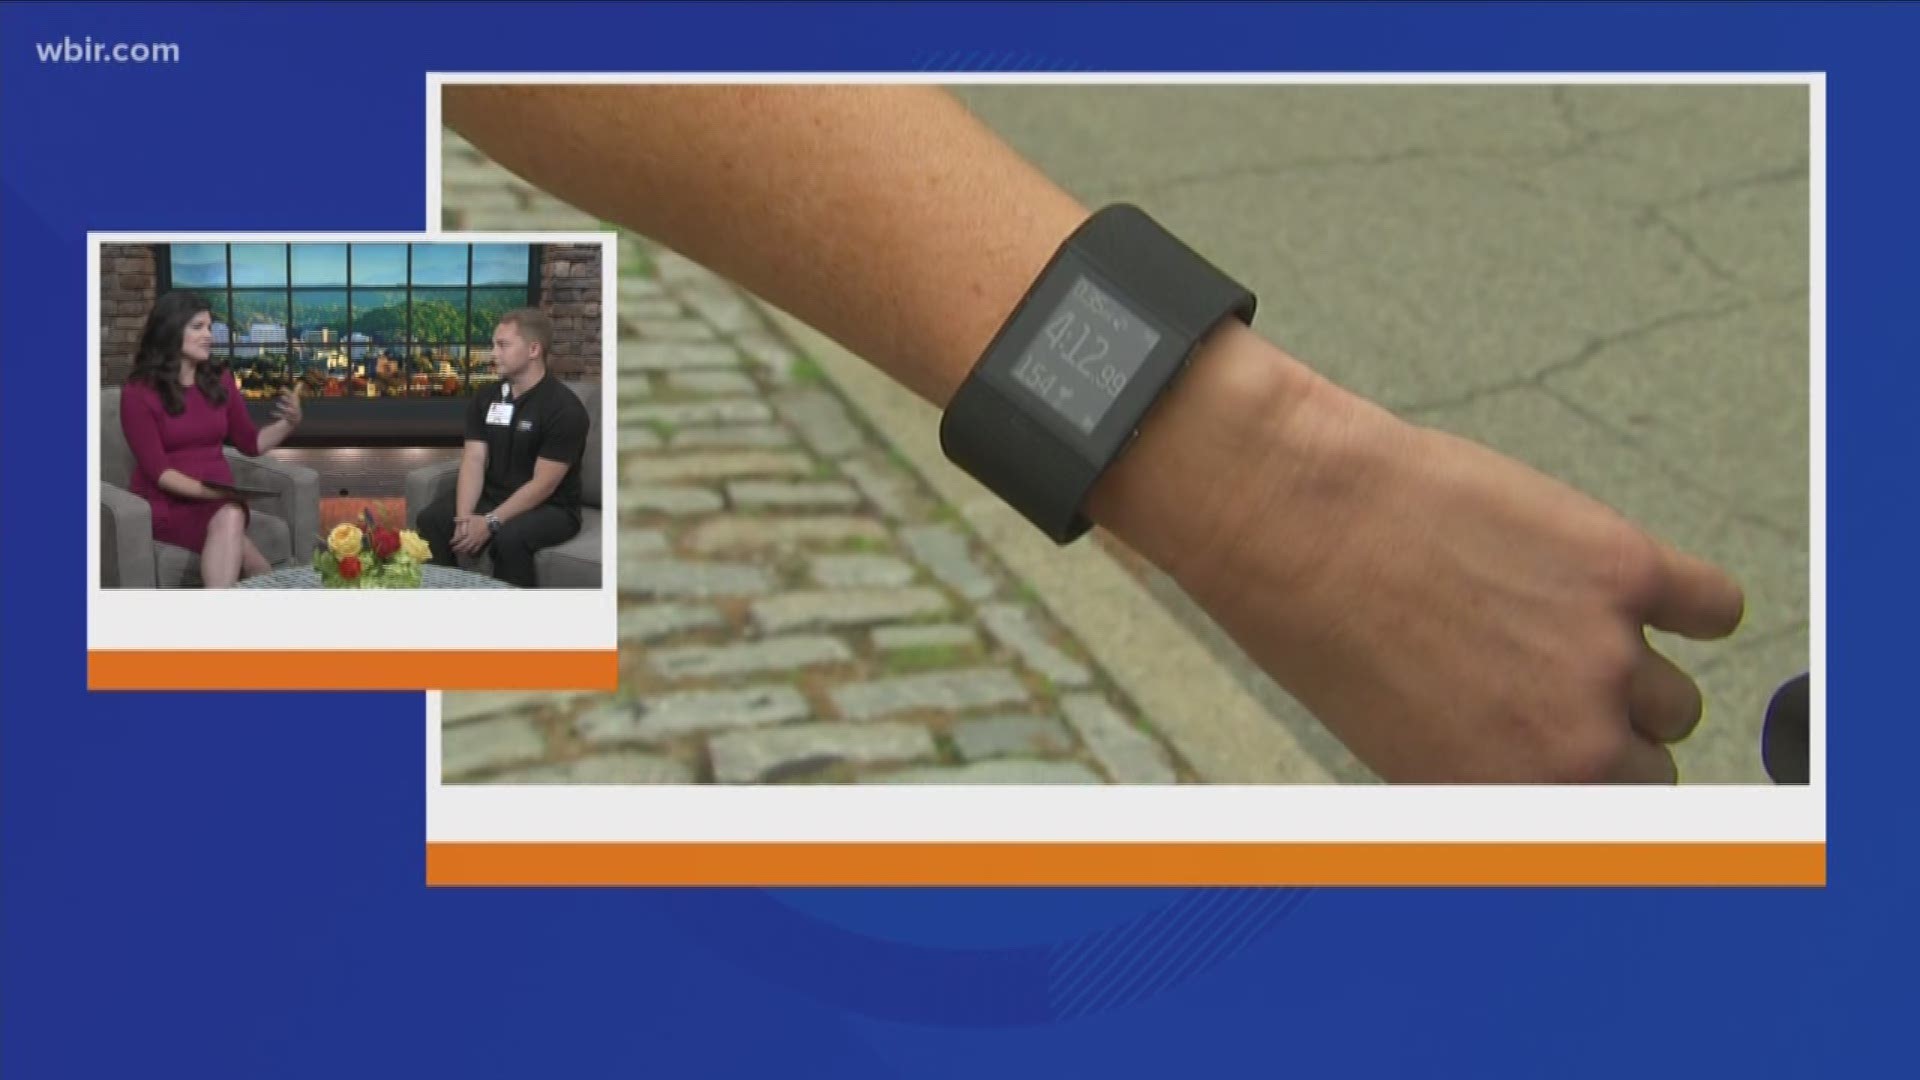 Fitness trackers you can wear are one of the latest trends, but how do they work?
Jesse Clendenin from UT Medical Center explains.